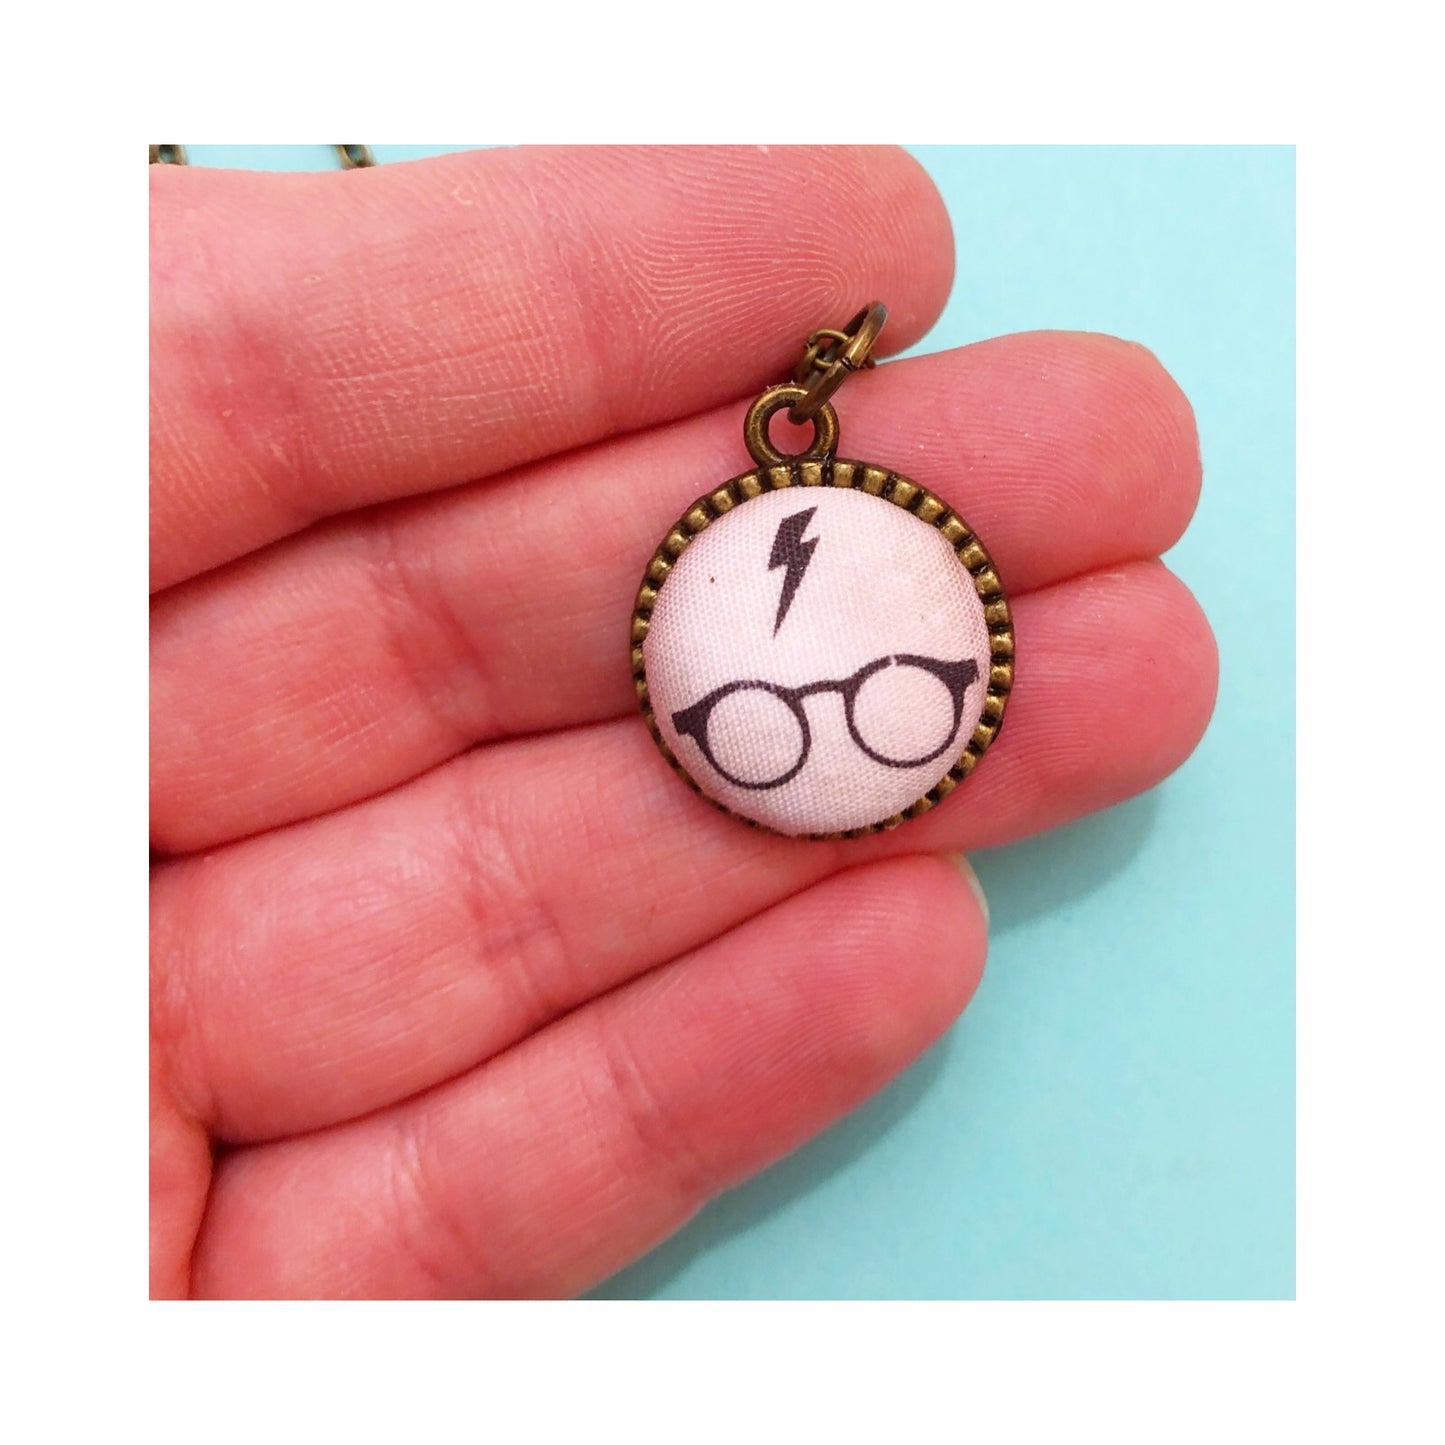 Wizard Glasses Round Necklace